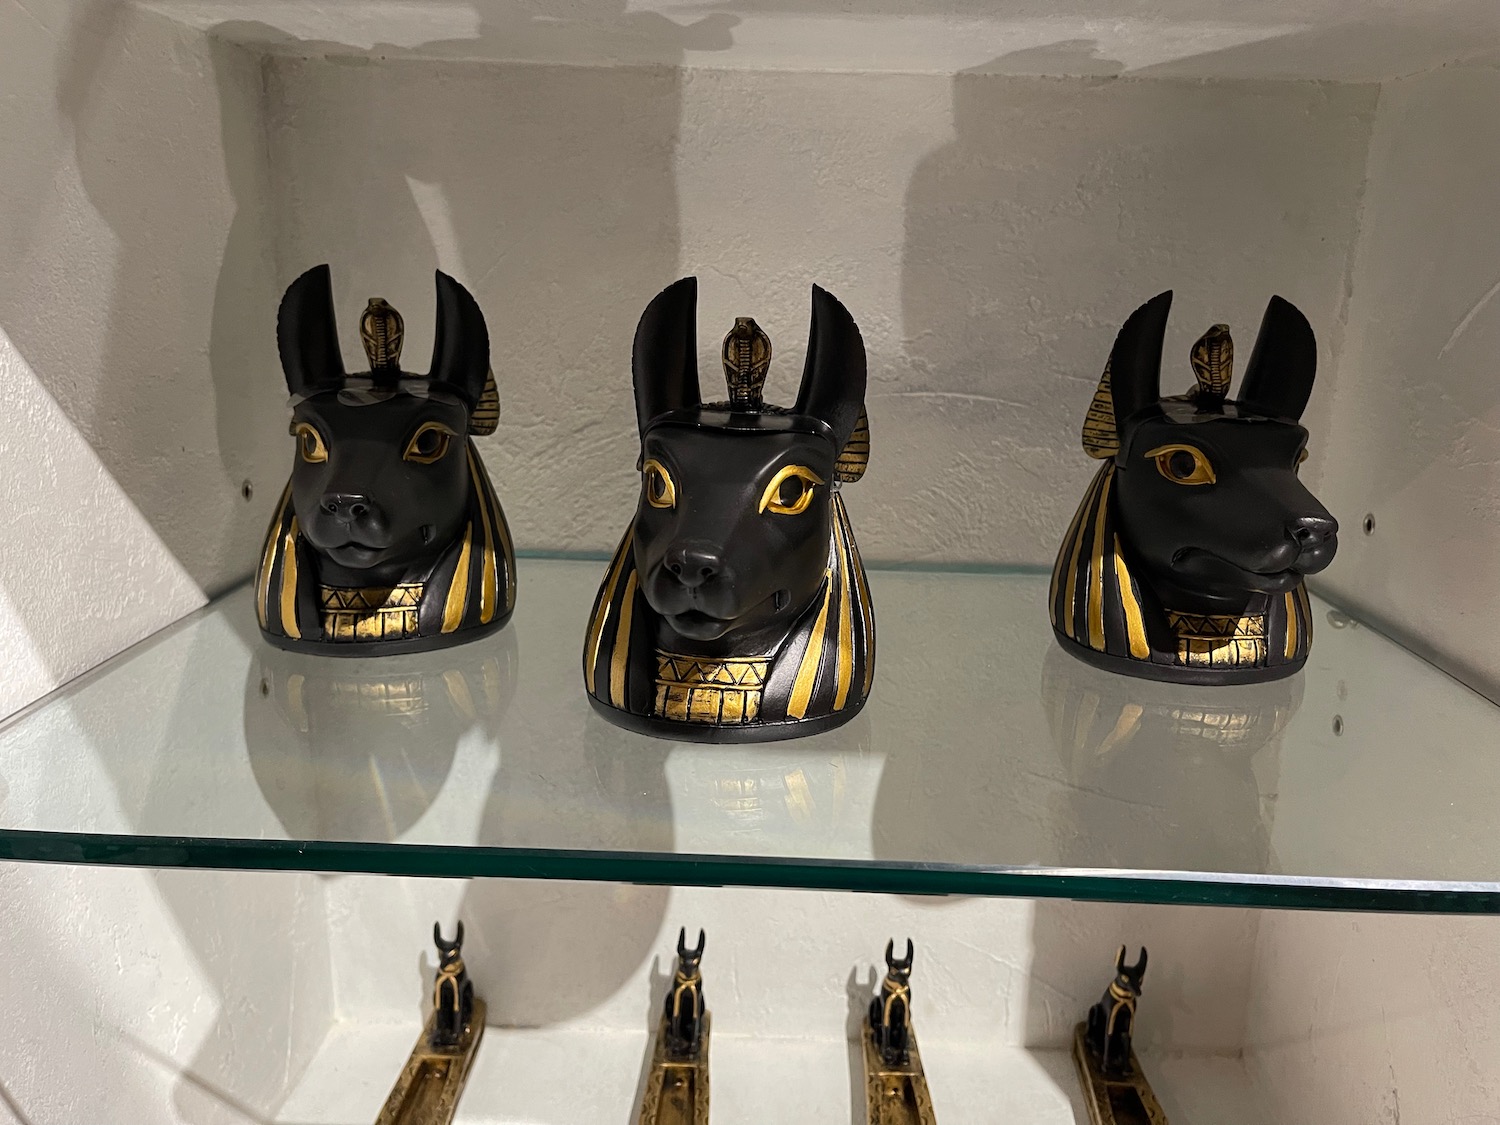 a group of black and gold statues on a glass shelf